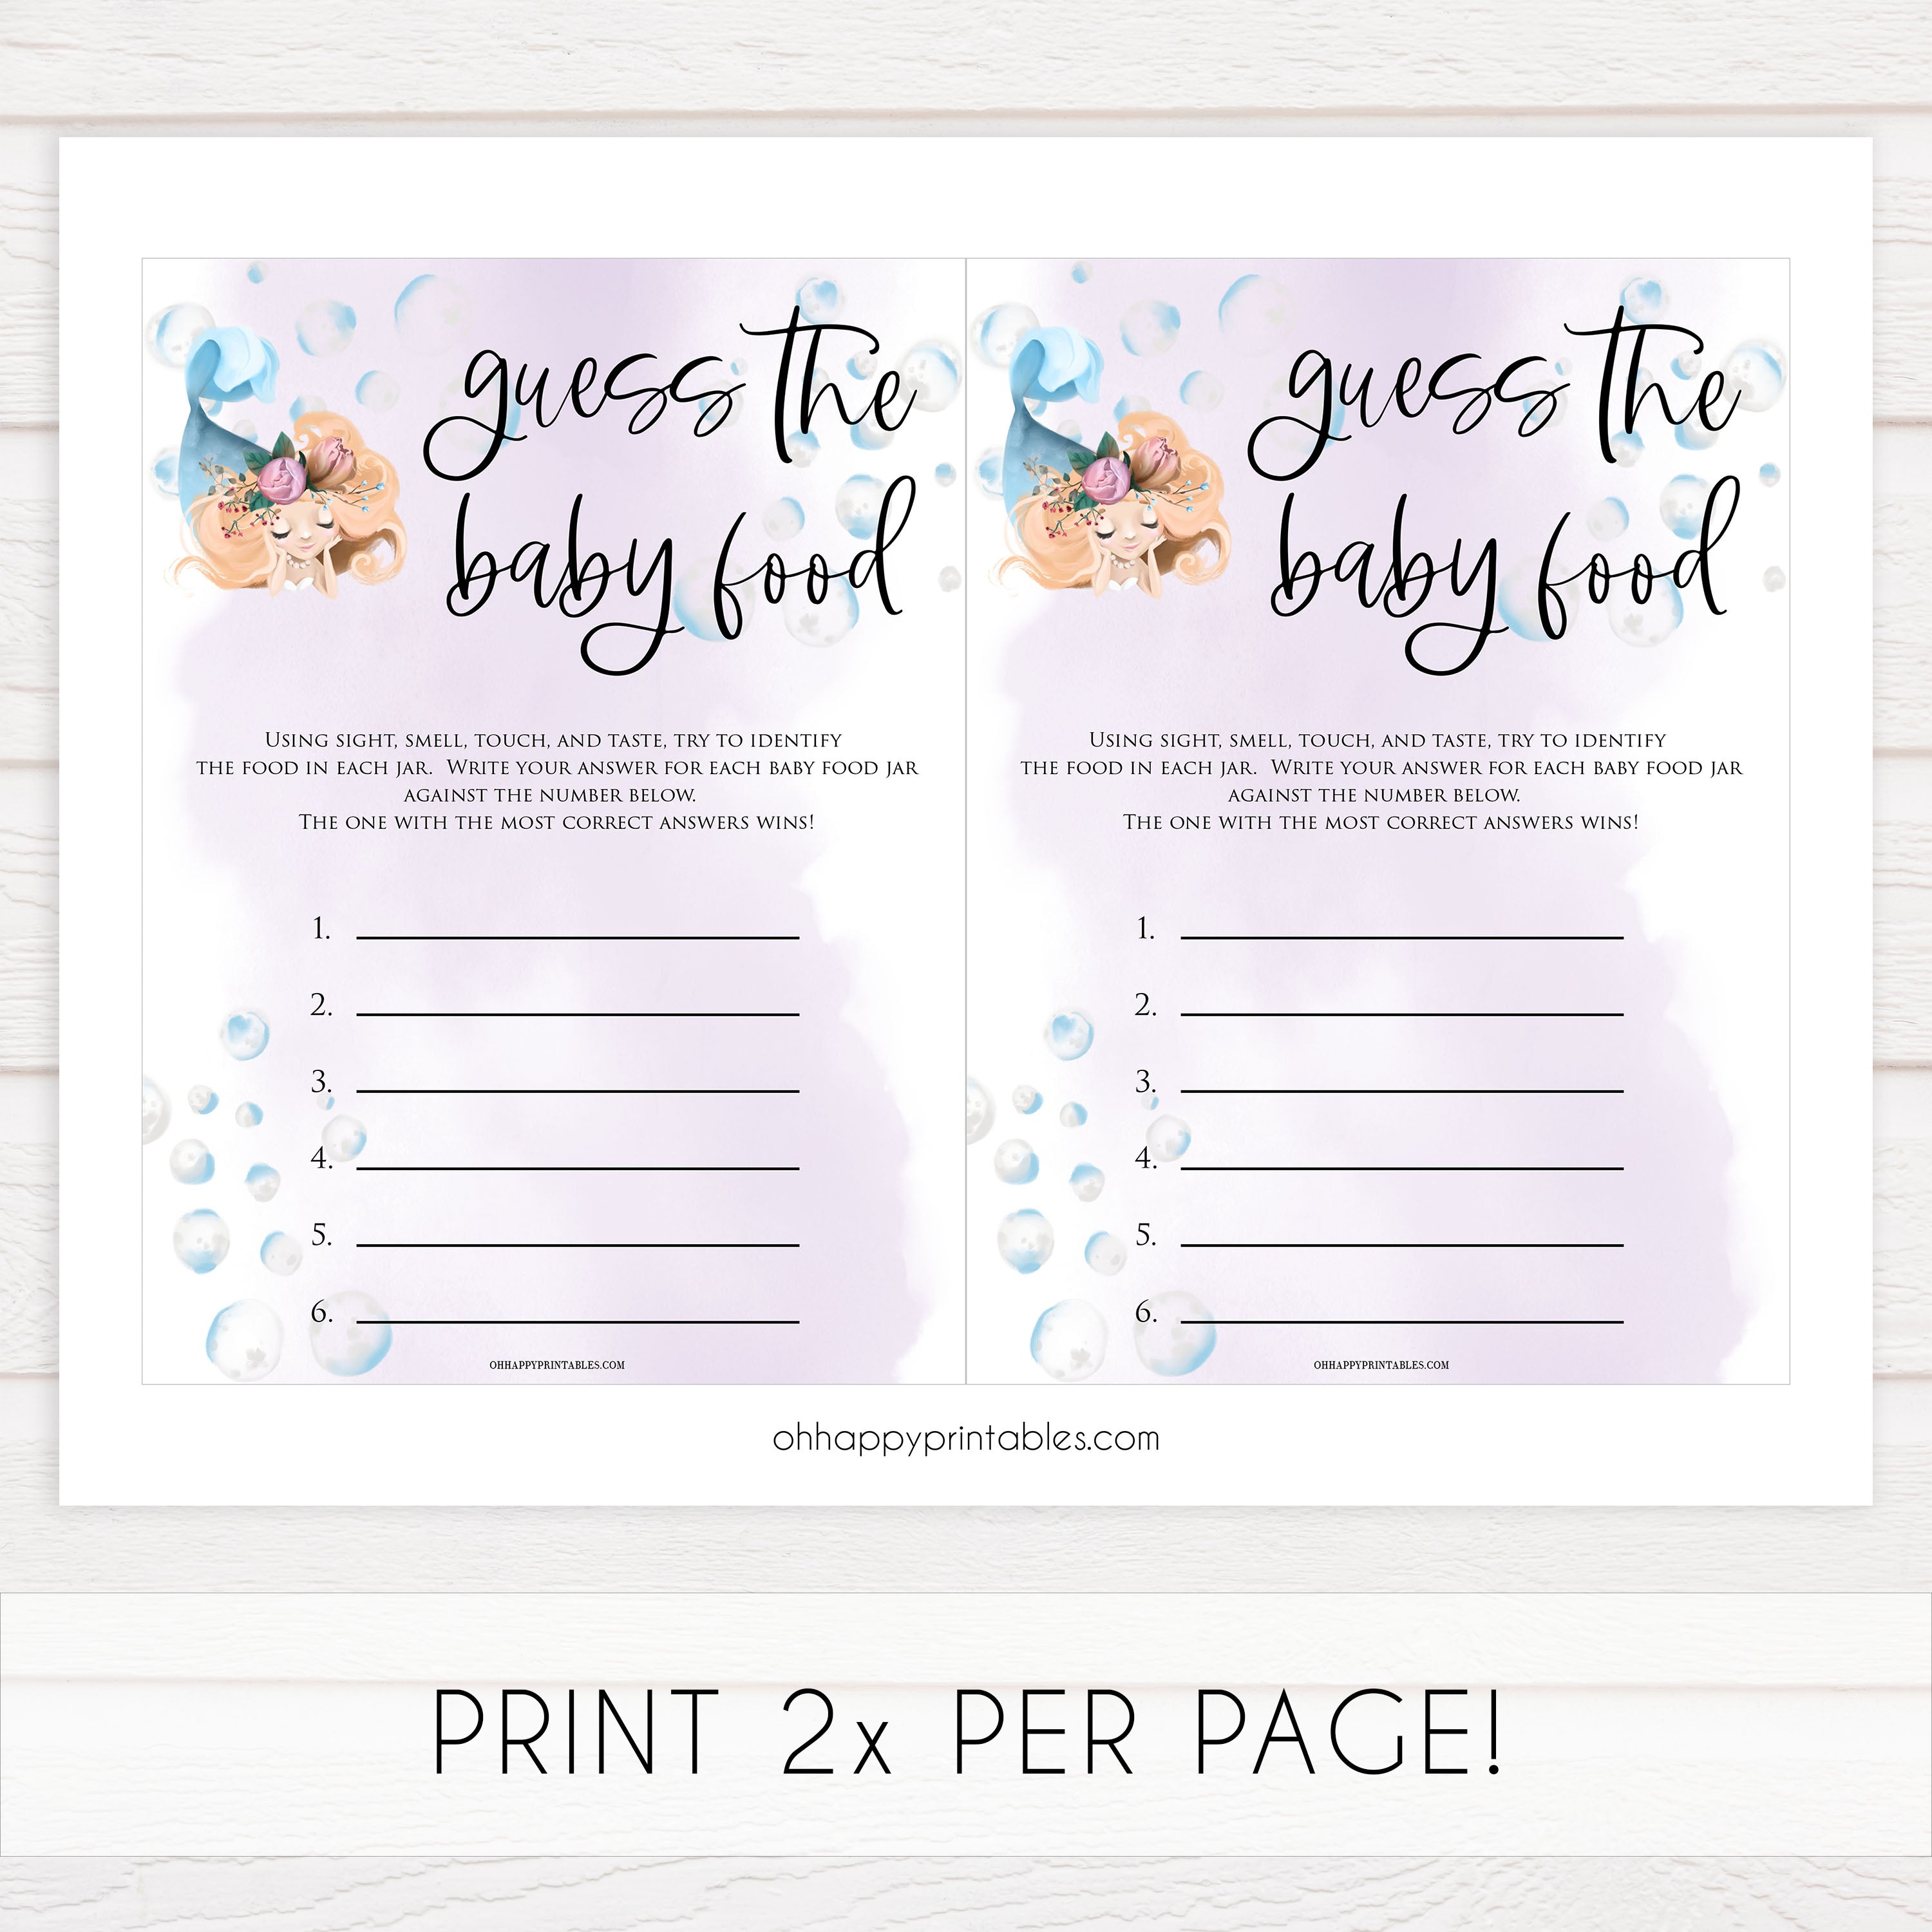 guess the baby food game, Printable baby shower games, little mermaid baby games, baby shower games, fun baby shower ideas, top baby shower ideas, little mermaid baby shower, baby shower games, pink hearts baby shower ideas